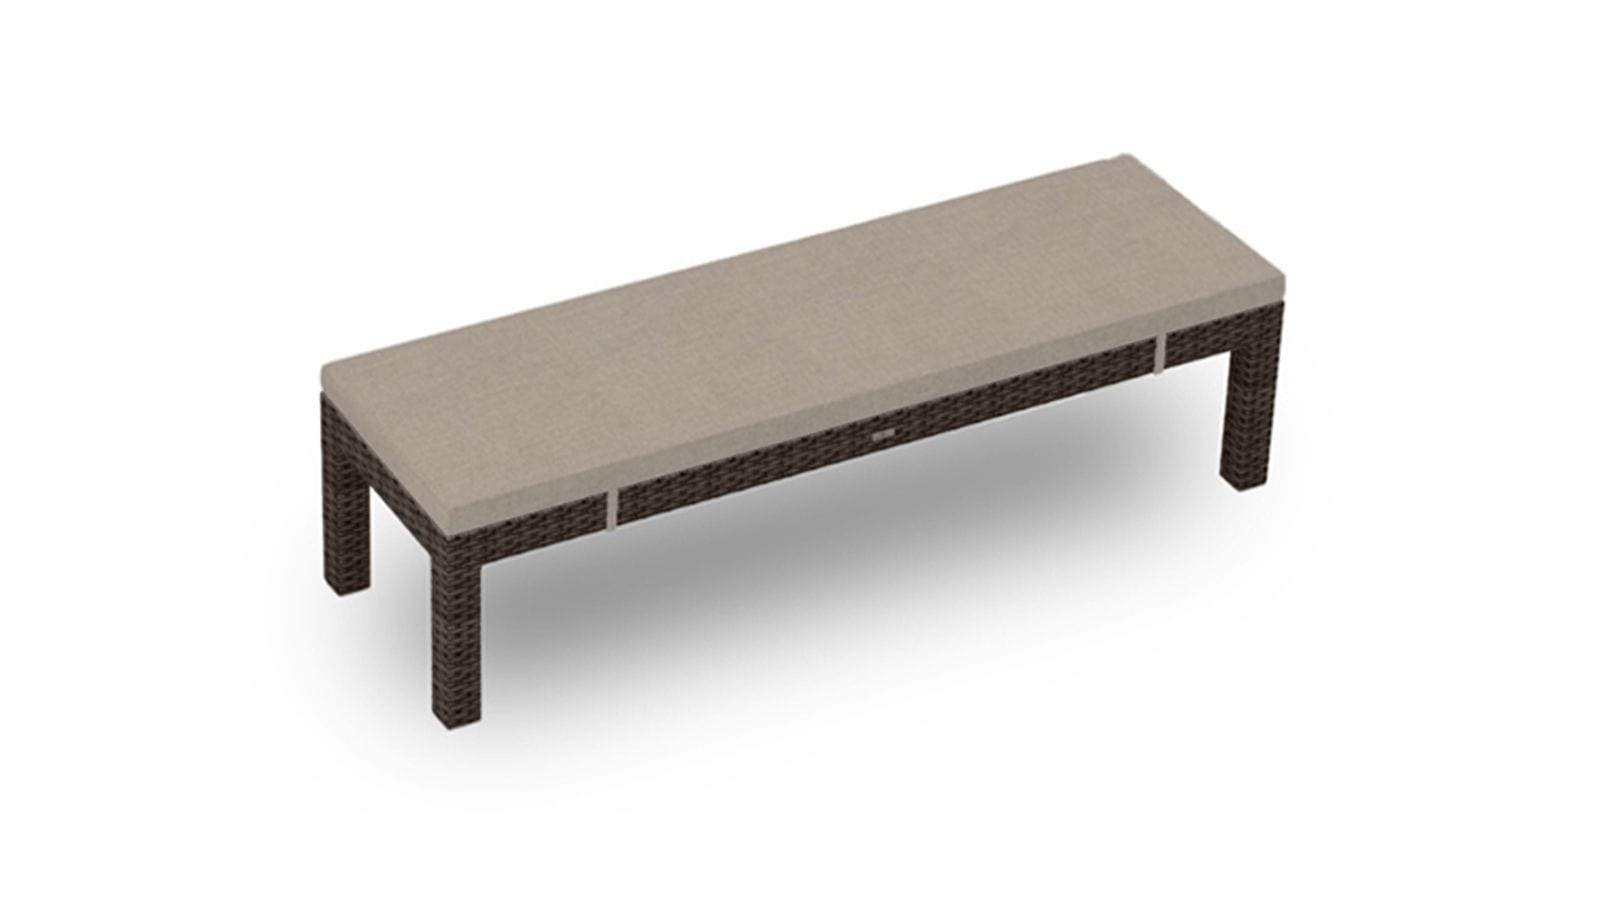 Harmonia Living Outdoor Dining Chair Canvas Flax Harmonia Living - Arden 3-Seater Dining Bench | HL-ARD-CH-3DB